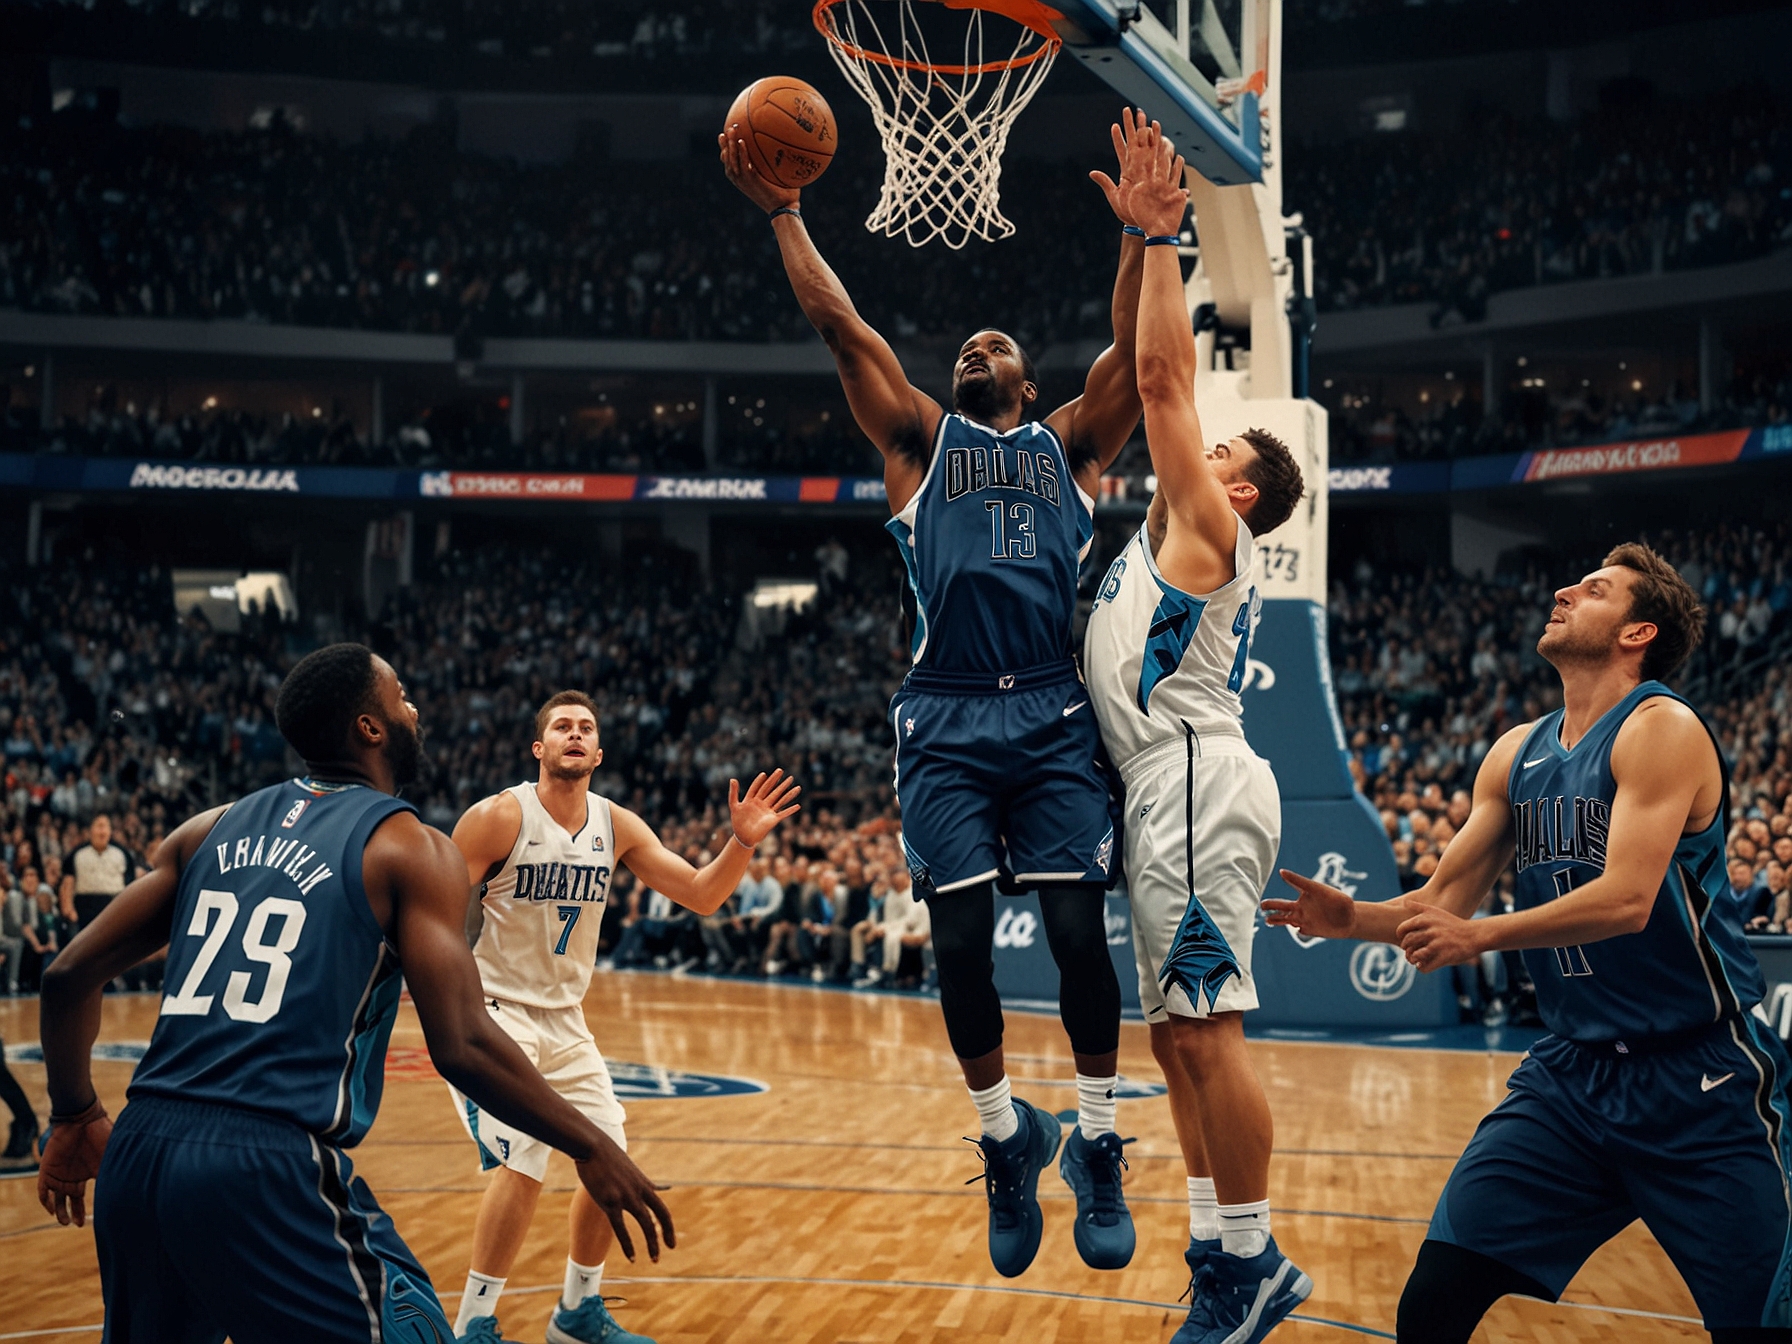 A detailed illustration of the game, capturing the pivotal moment in the third quarter where the Dallas Mavericks shifted momentum with exceptional defensive efforts and strategic plays.